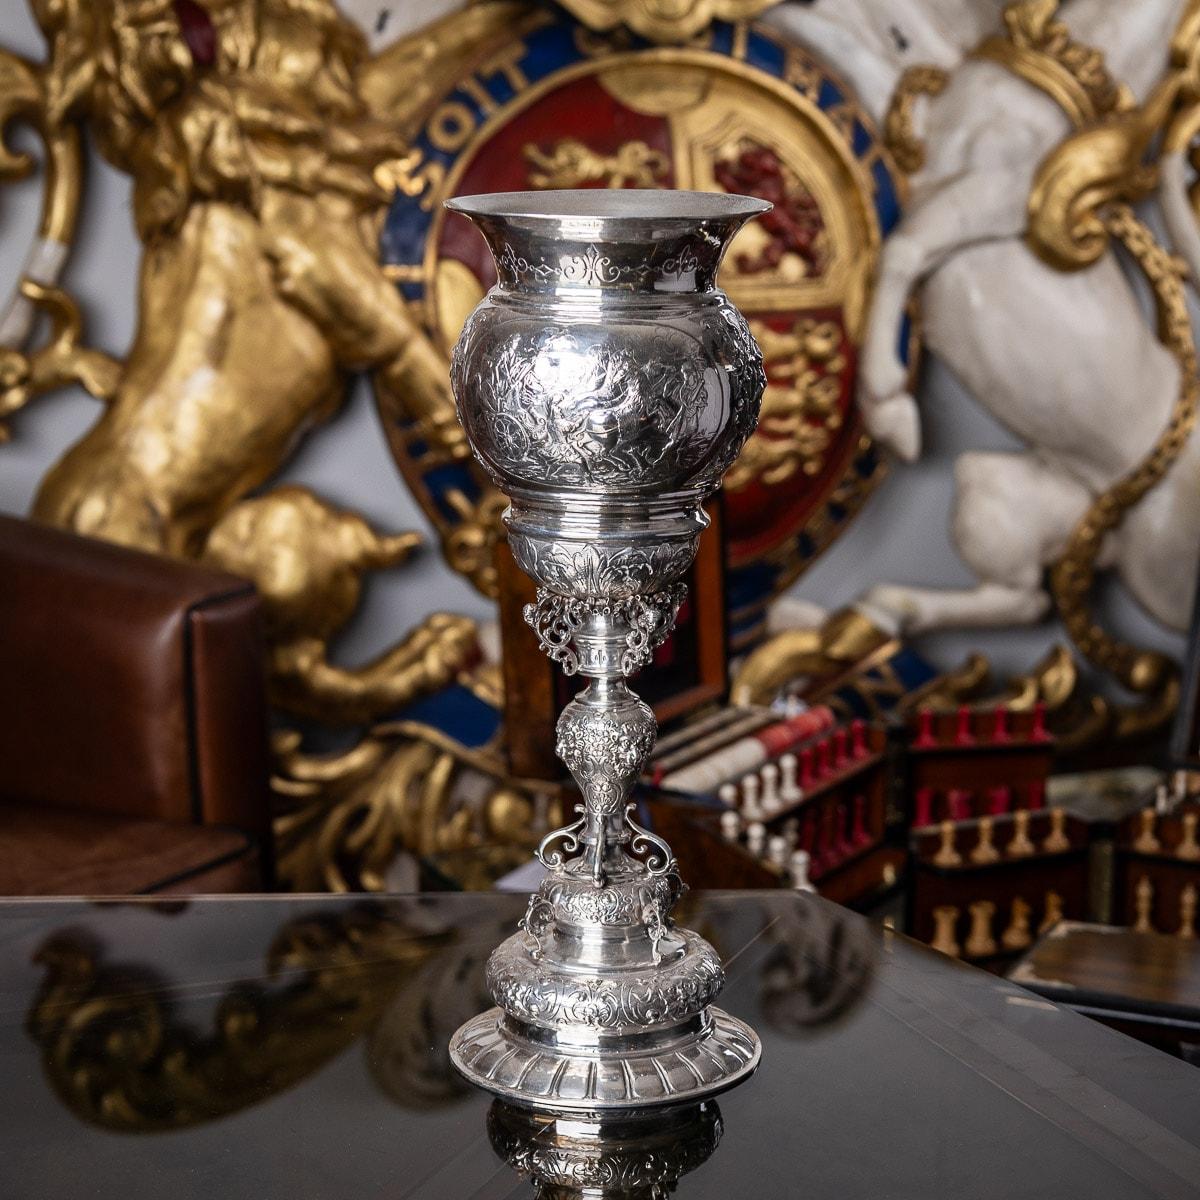 Antique mid-19th Century German solid silver goblet, made in the style of the early-17th Century examples, which were originaly made in Augsburg and Nuremberg. The piece beautifully embossed with scrolling foliage, panels depicting mythological